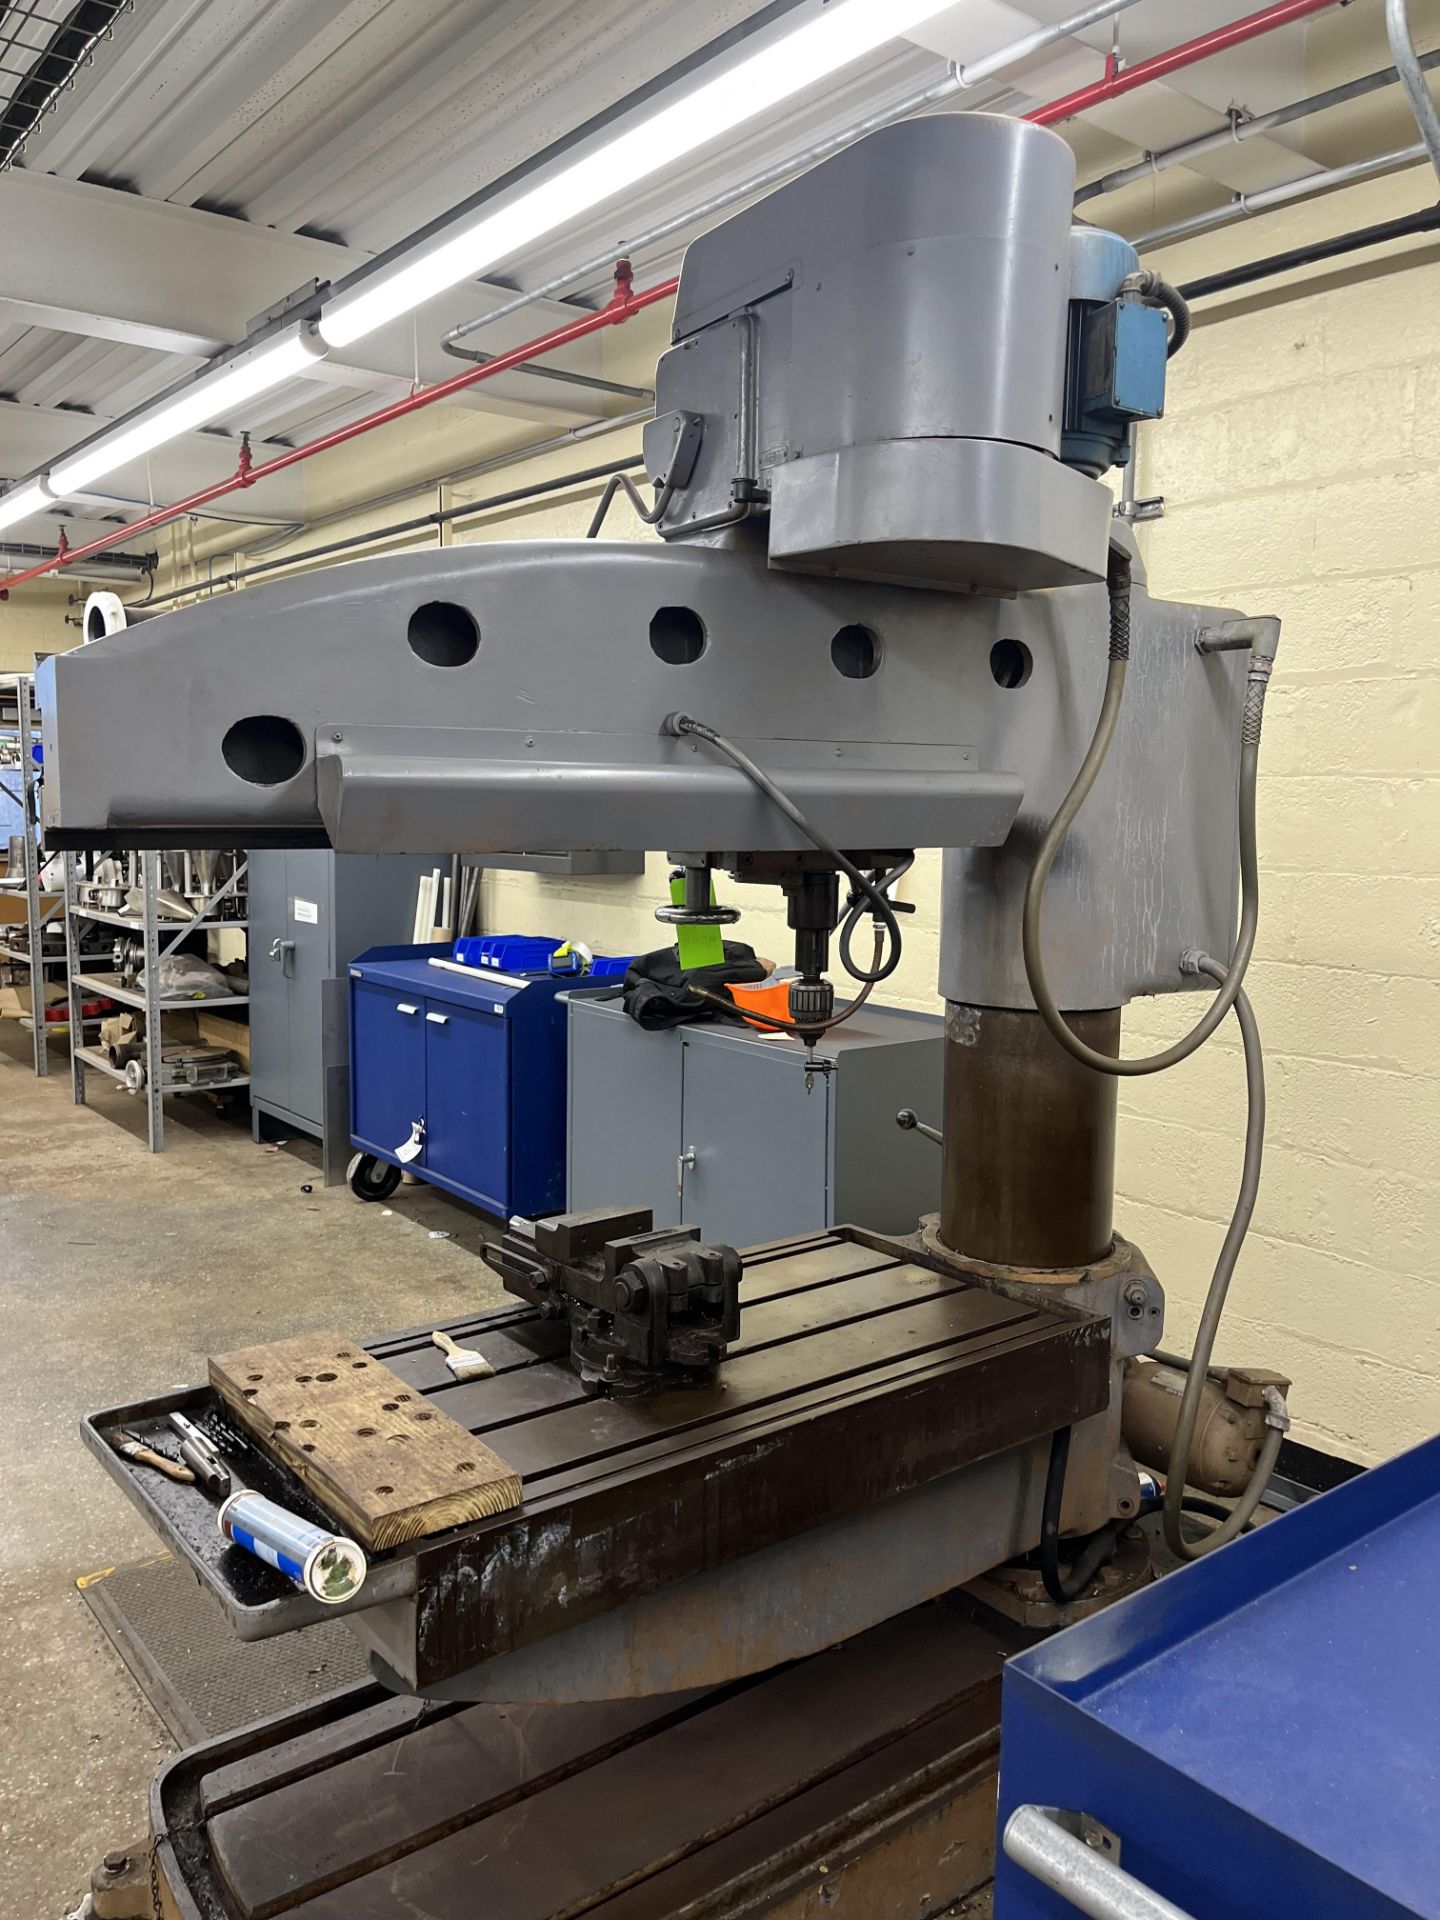 FOSDICK SENSITIVE RADIAL DRILLING MACHINE, POWER ELEVATING TABLE (SIMPLE LOADING FEE $550) - Image 2 of 8